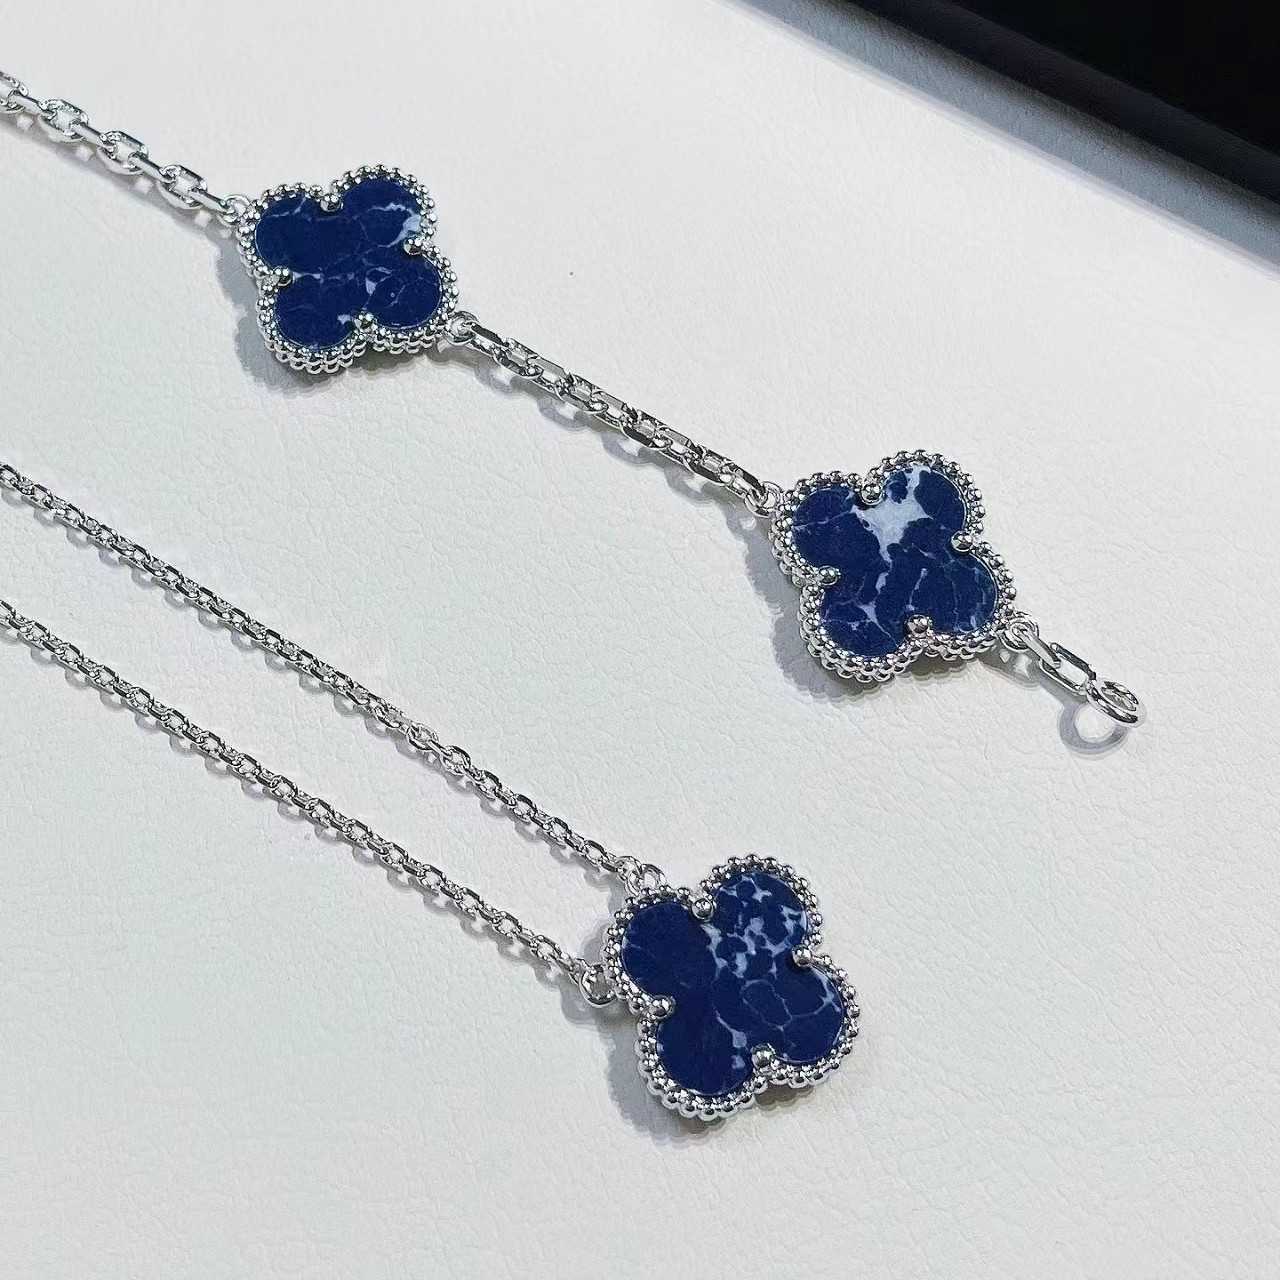 Original 1to1 Van C-A High version 925 sterling silver plated 18K gold Peter stone clover necklace bracelet earrings new set CNC